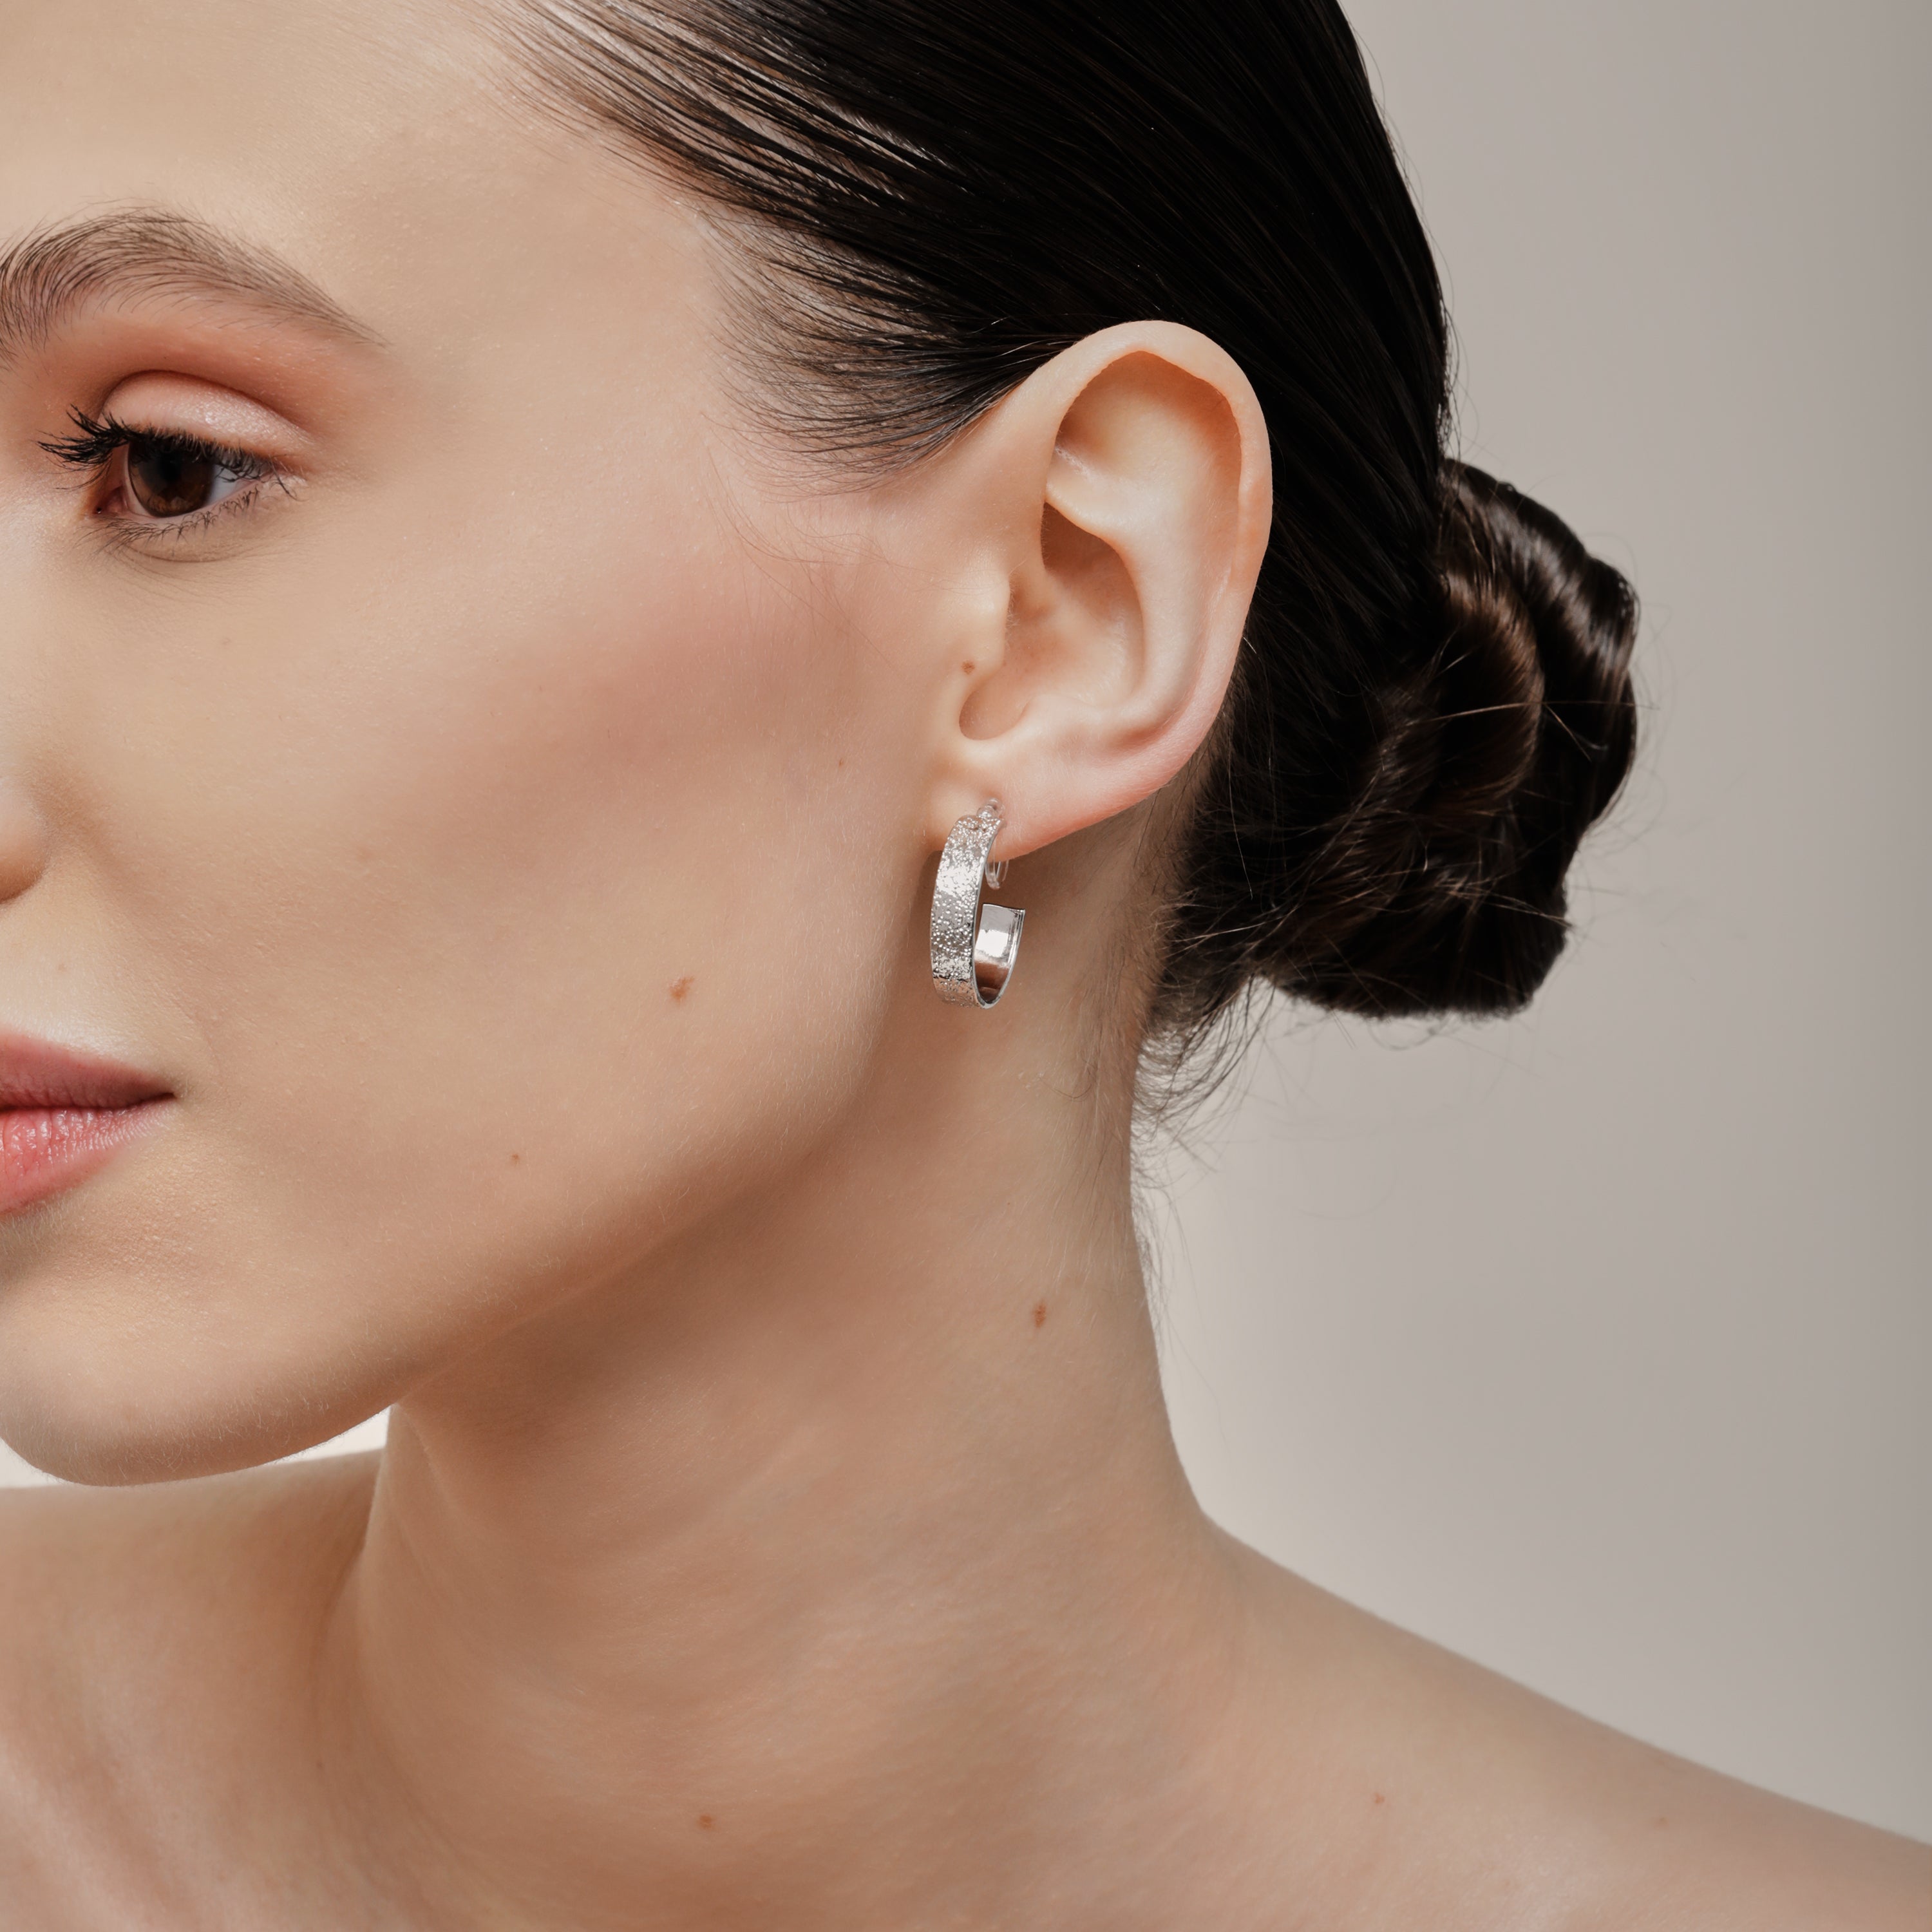 A model wearing the Speckled Hoop Clip On Earrings in Silver offer versatility and comfort for a range of ear sizes and sensitivities. With a medium secure hold, you can confidently wear them for 8-12 hours. Sold as a pair.